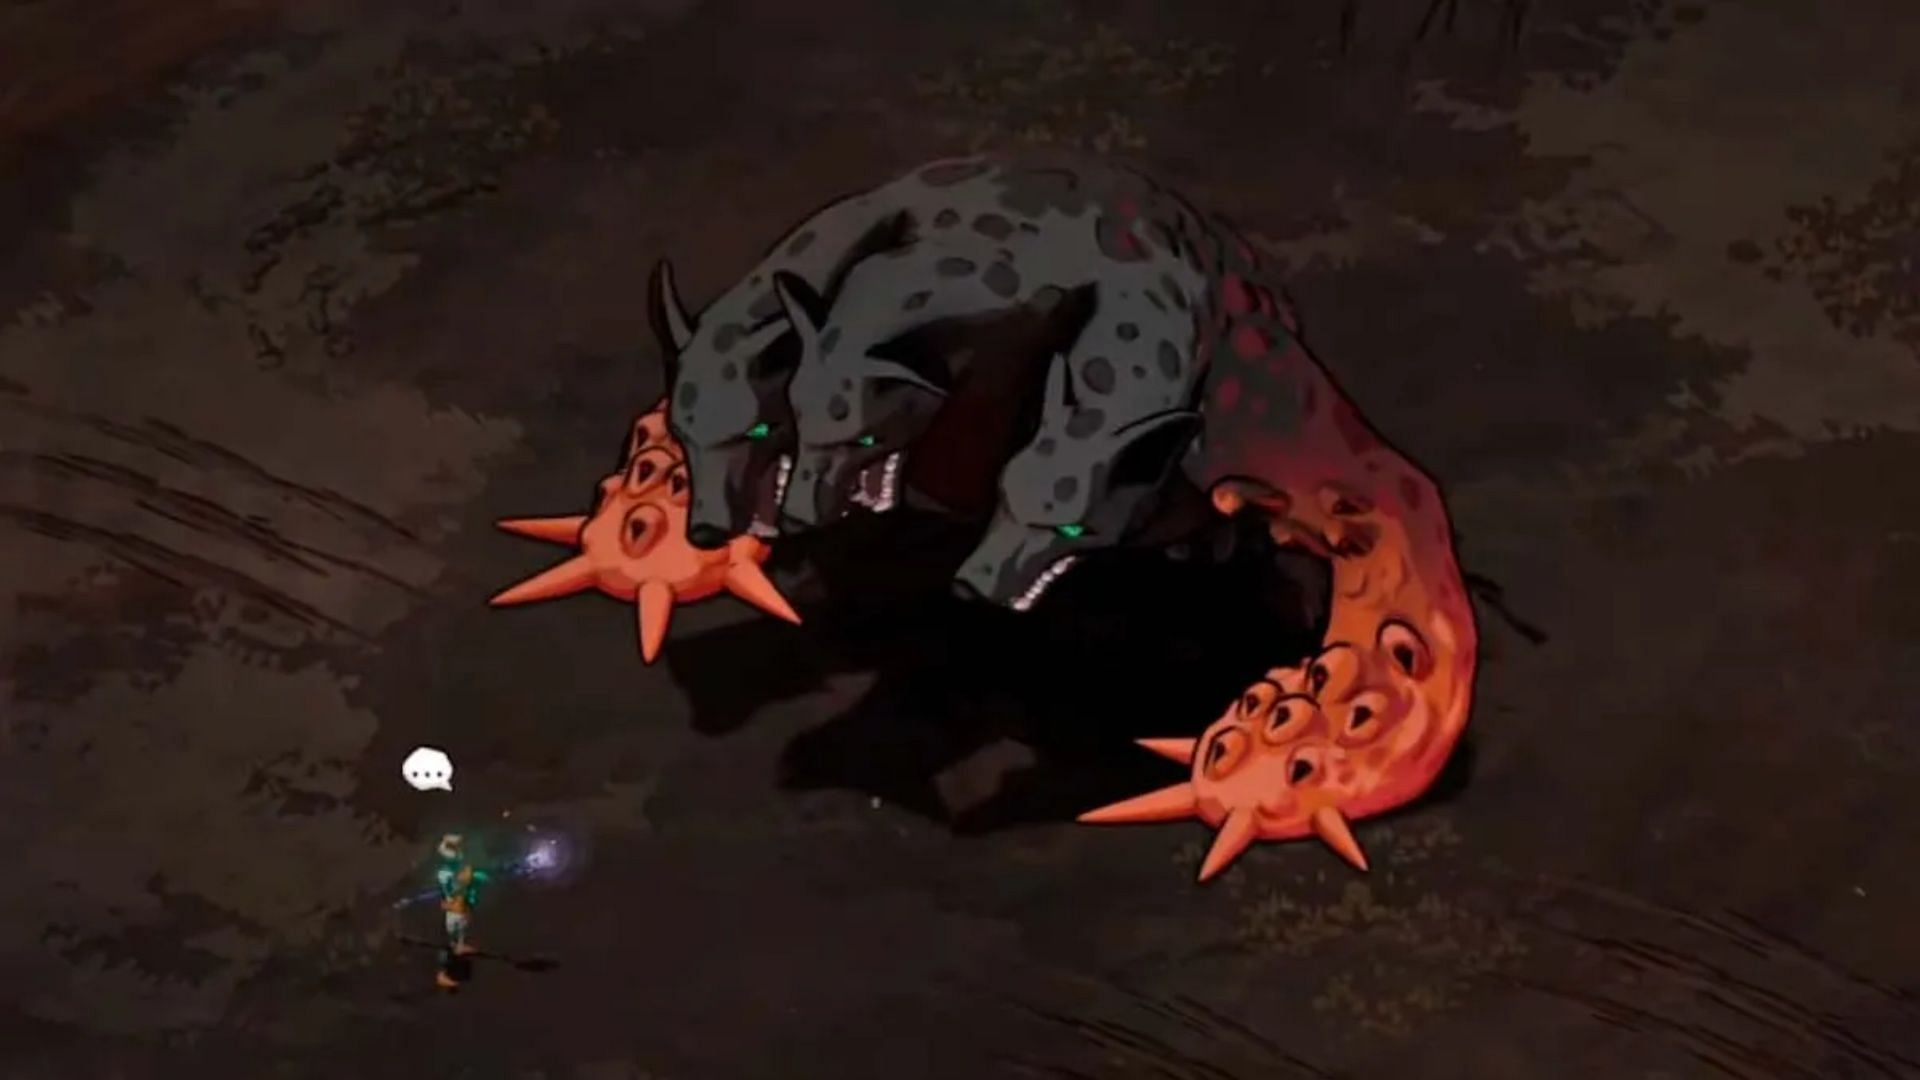 You will gain access to Tartarus after beating Cerberus (Image via Supergiant Games)